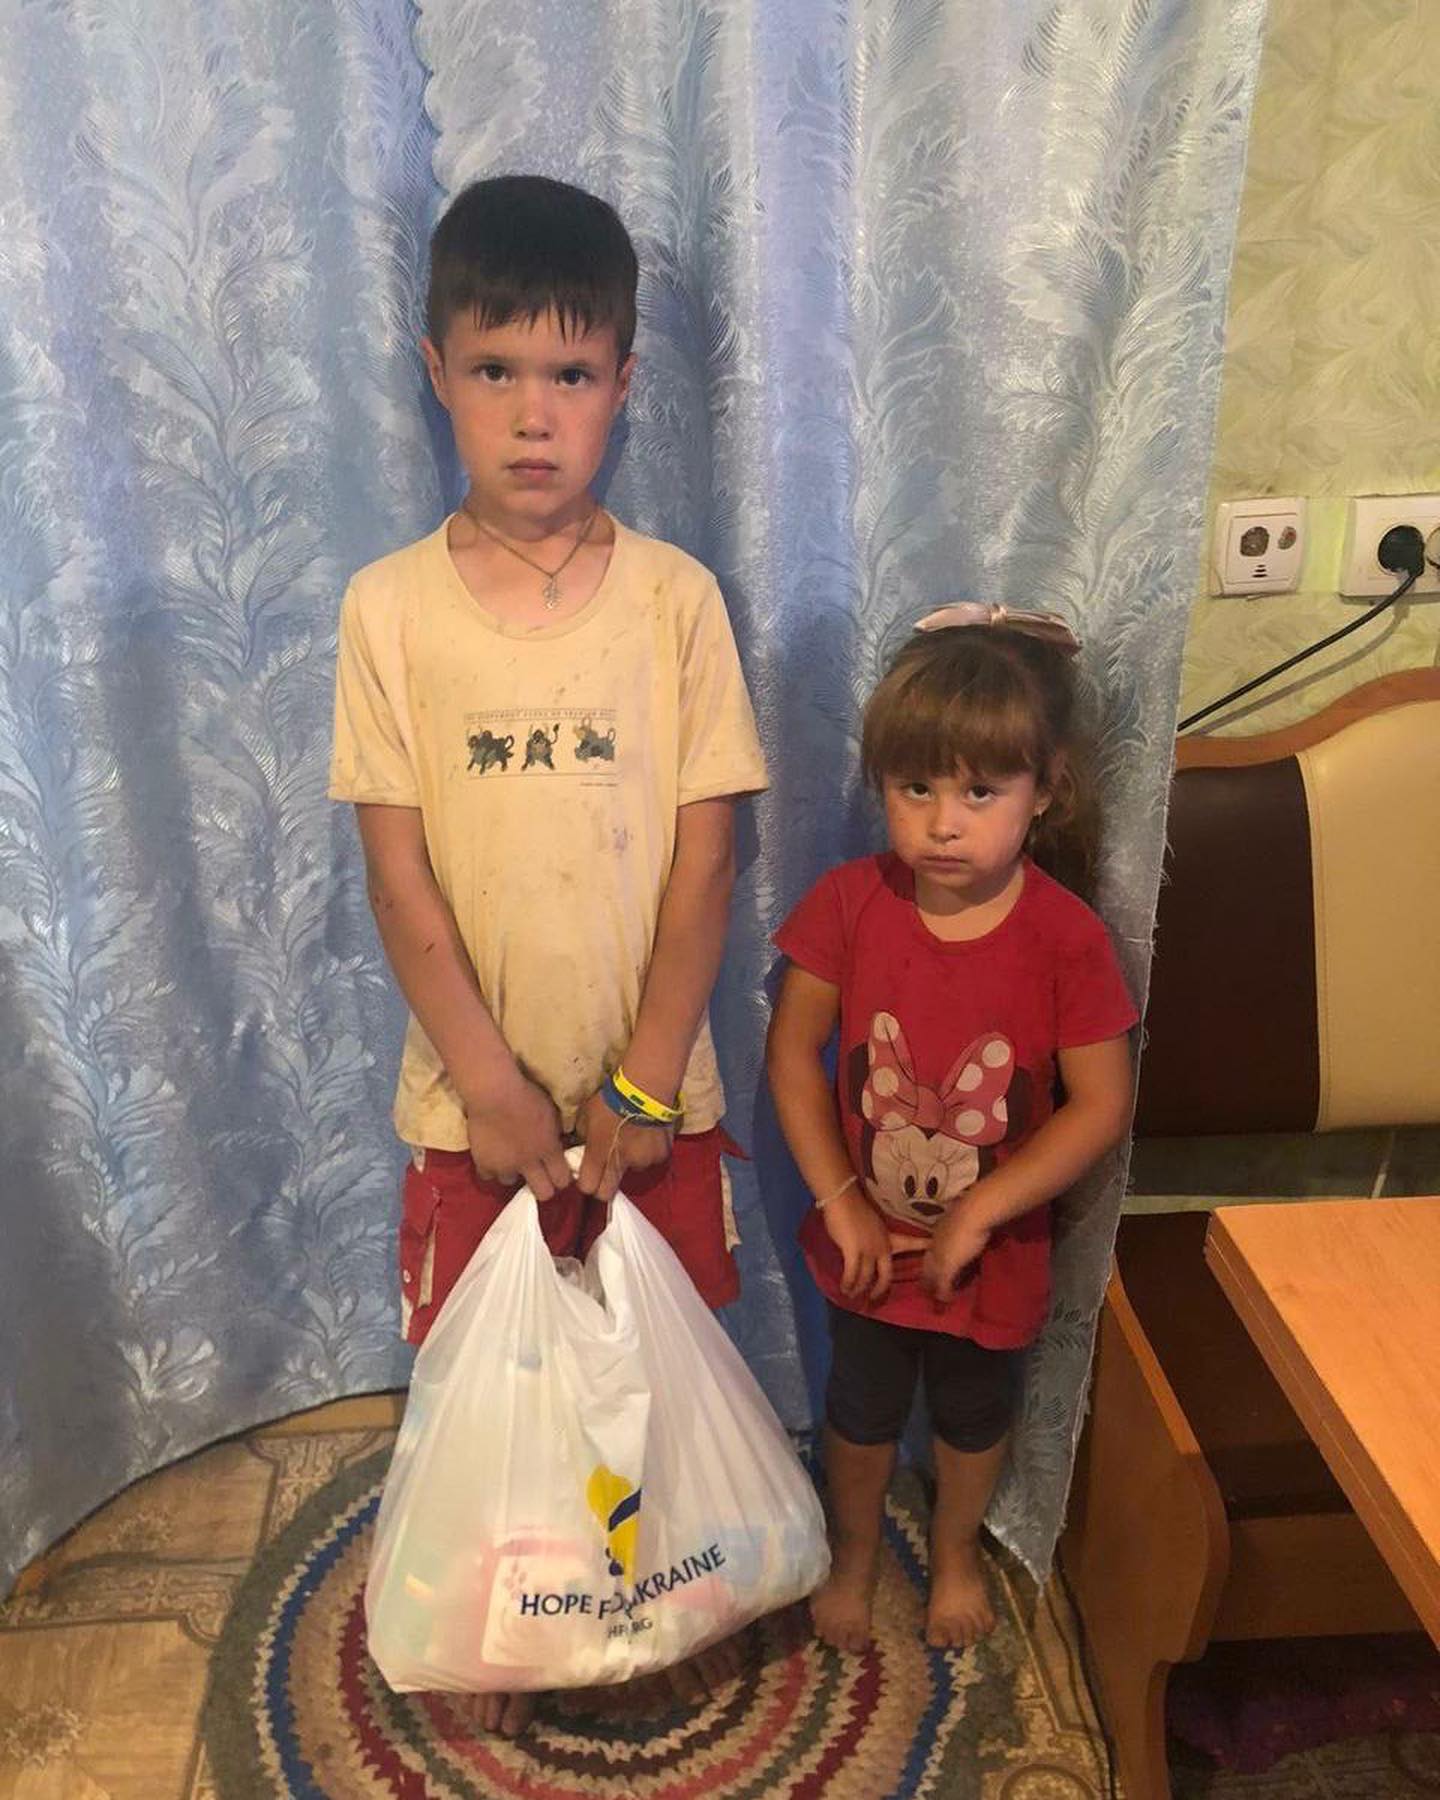 two children standing next to each other holding bags.